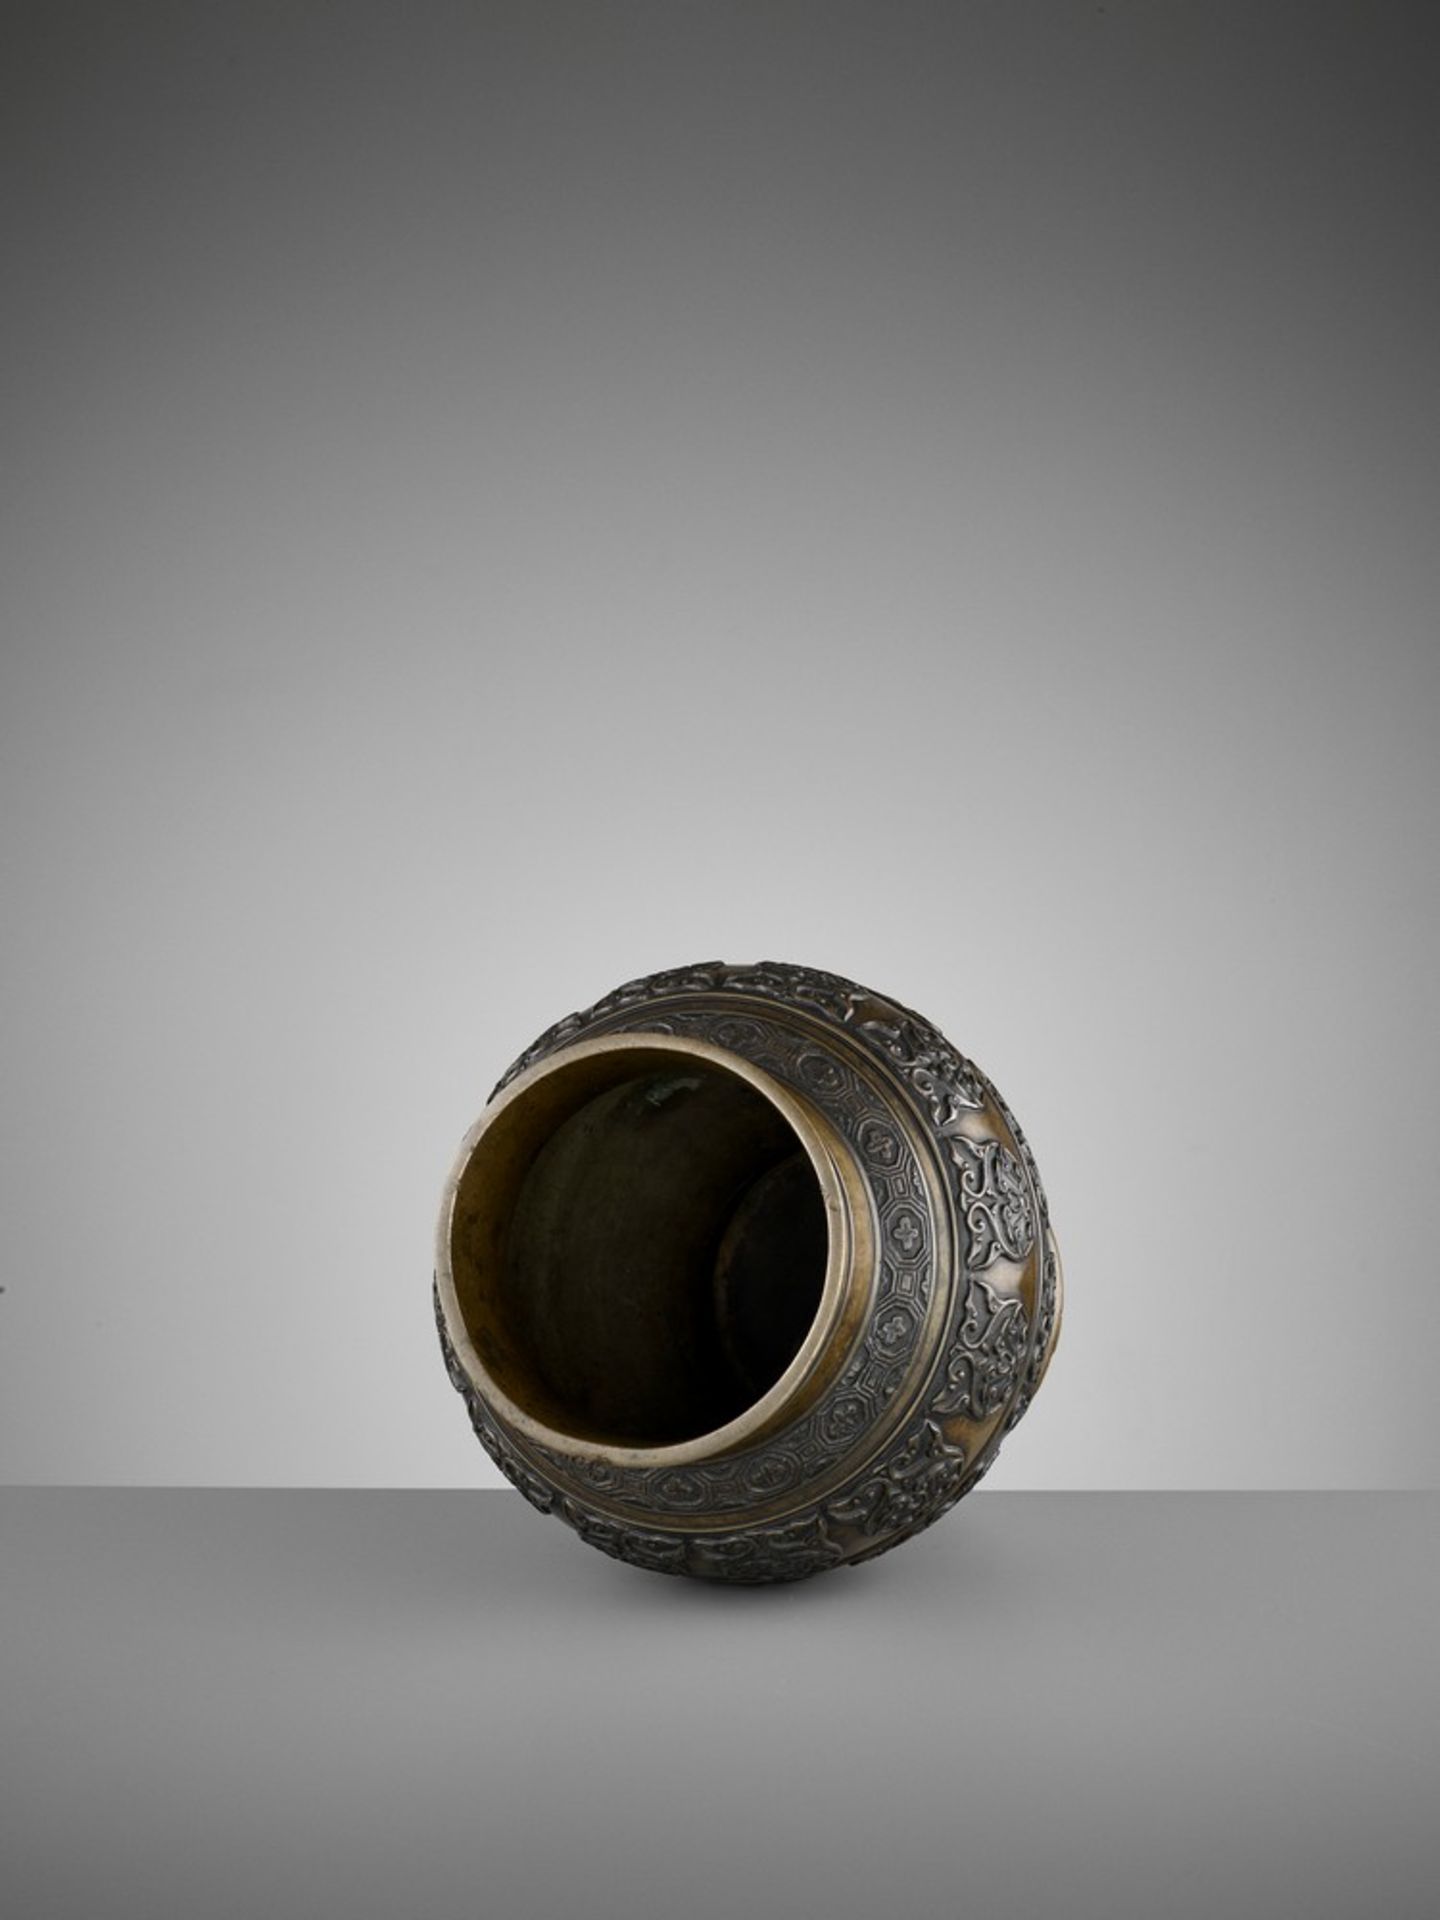 AN ARCHAISTIC BRONZE BALUSTER VASE, 17TH CENTURY - Image 7 of 8